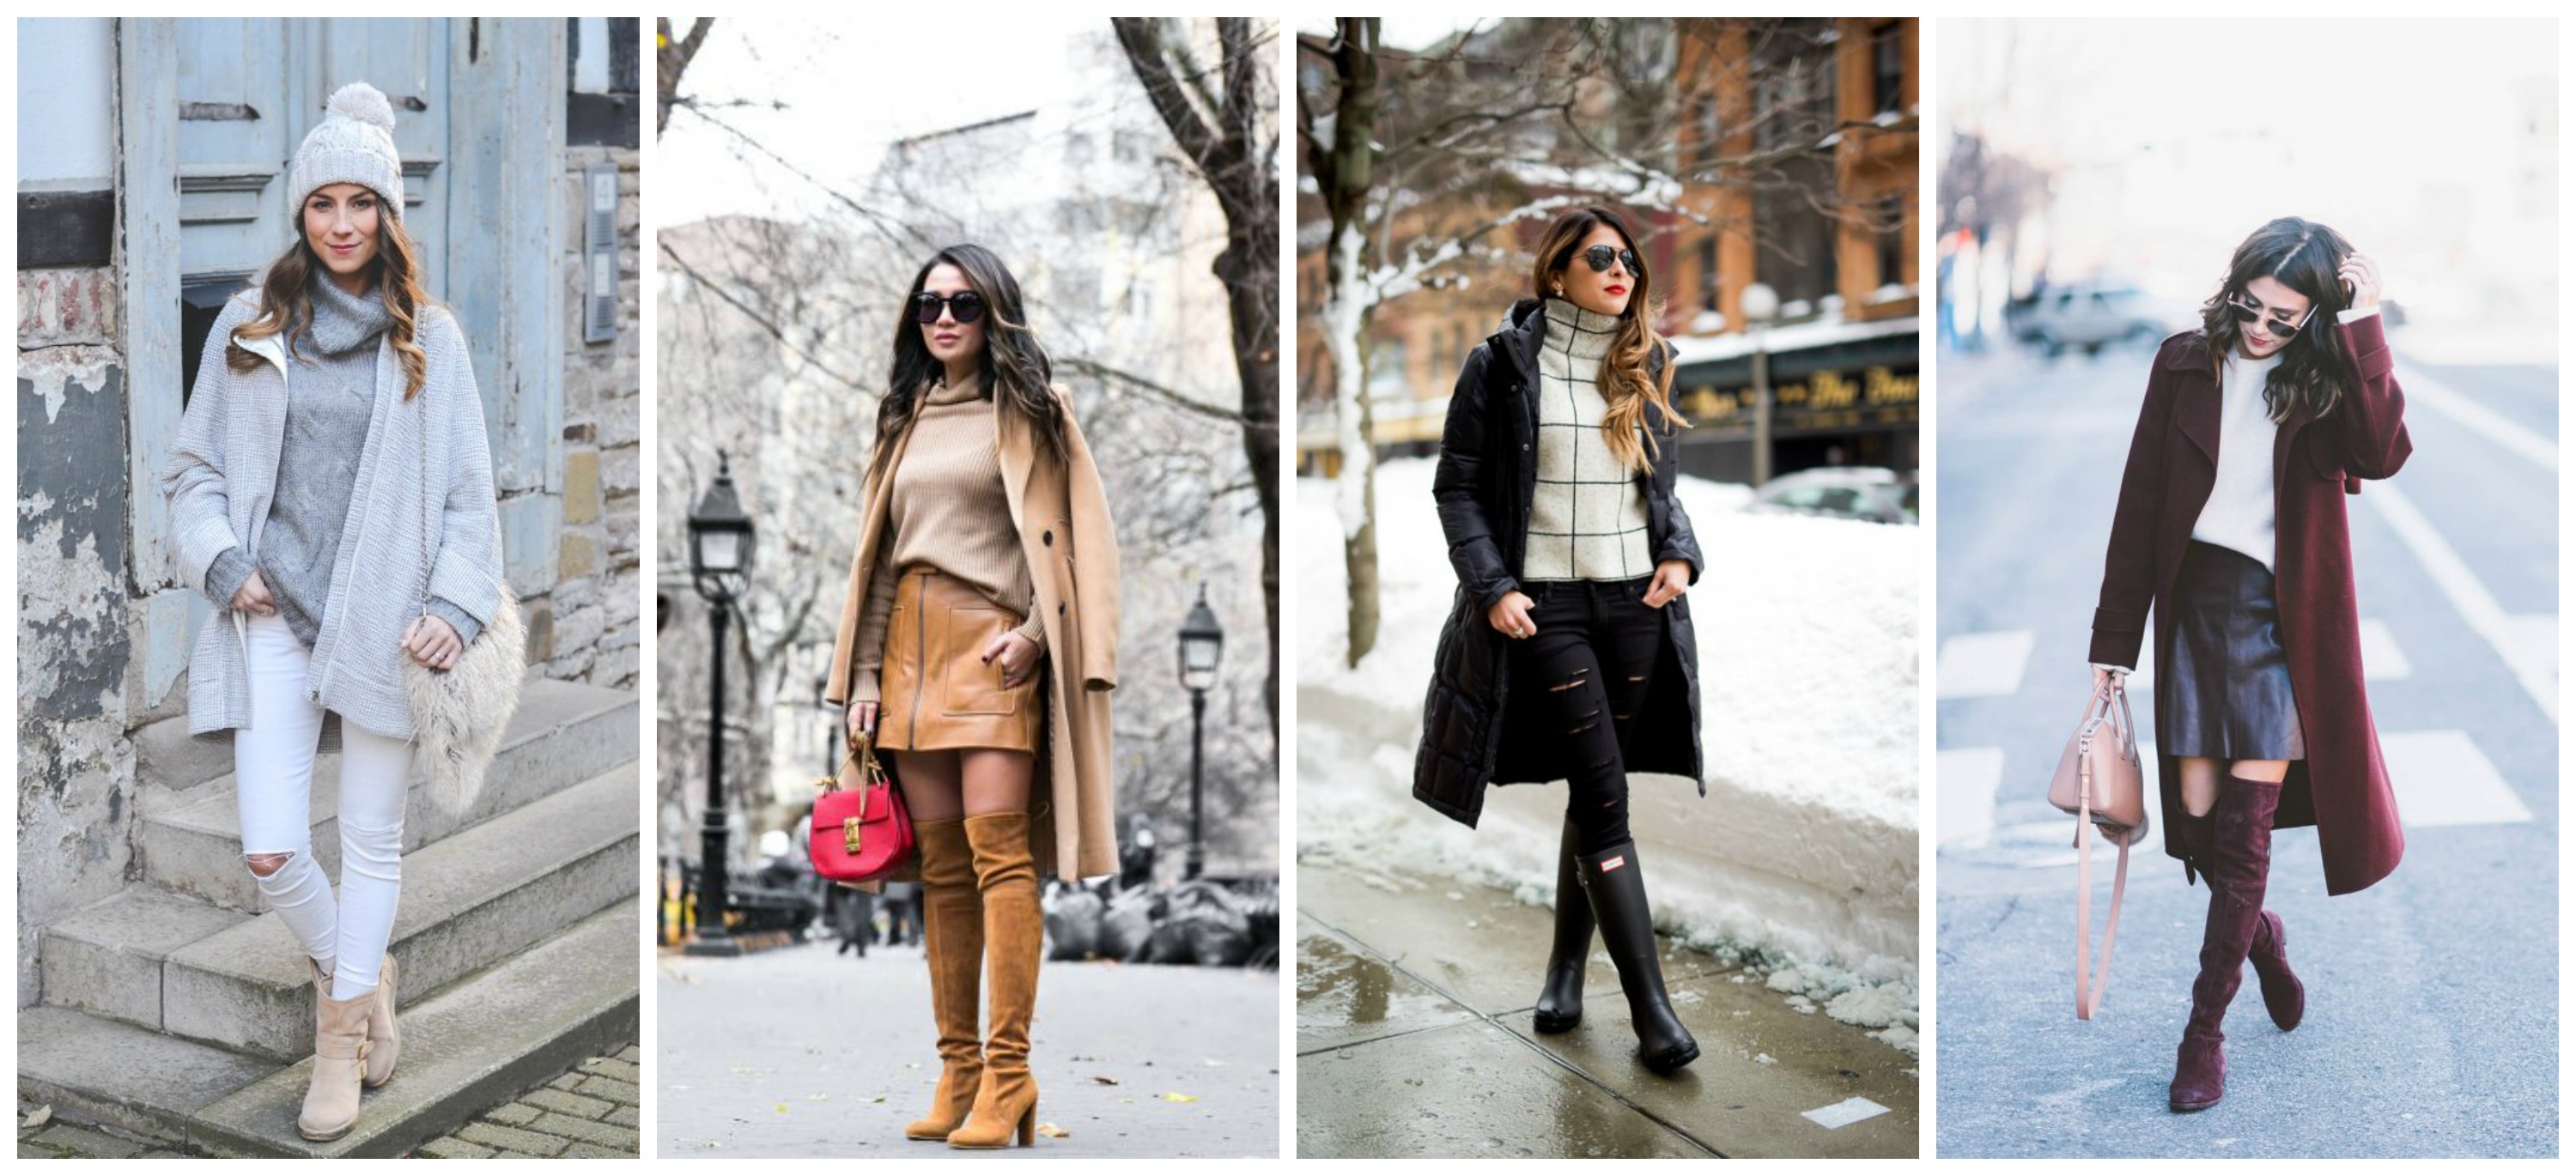 15 Chic and Comfy Winter Outfit Ideas To Copy Now - fashionsy.com